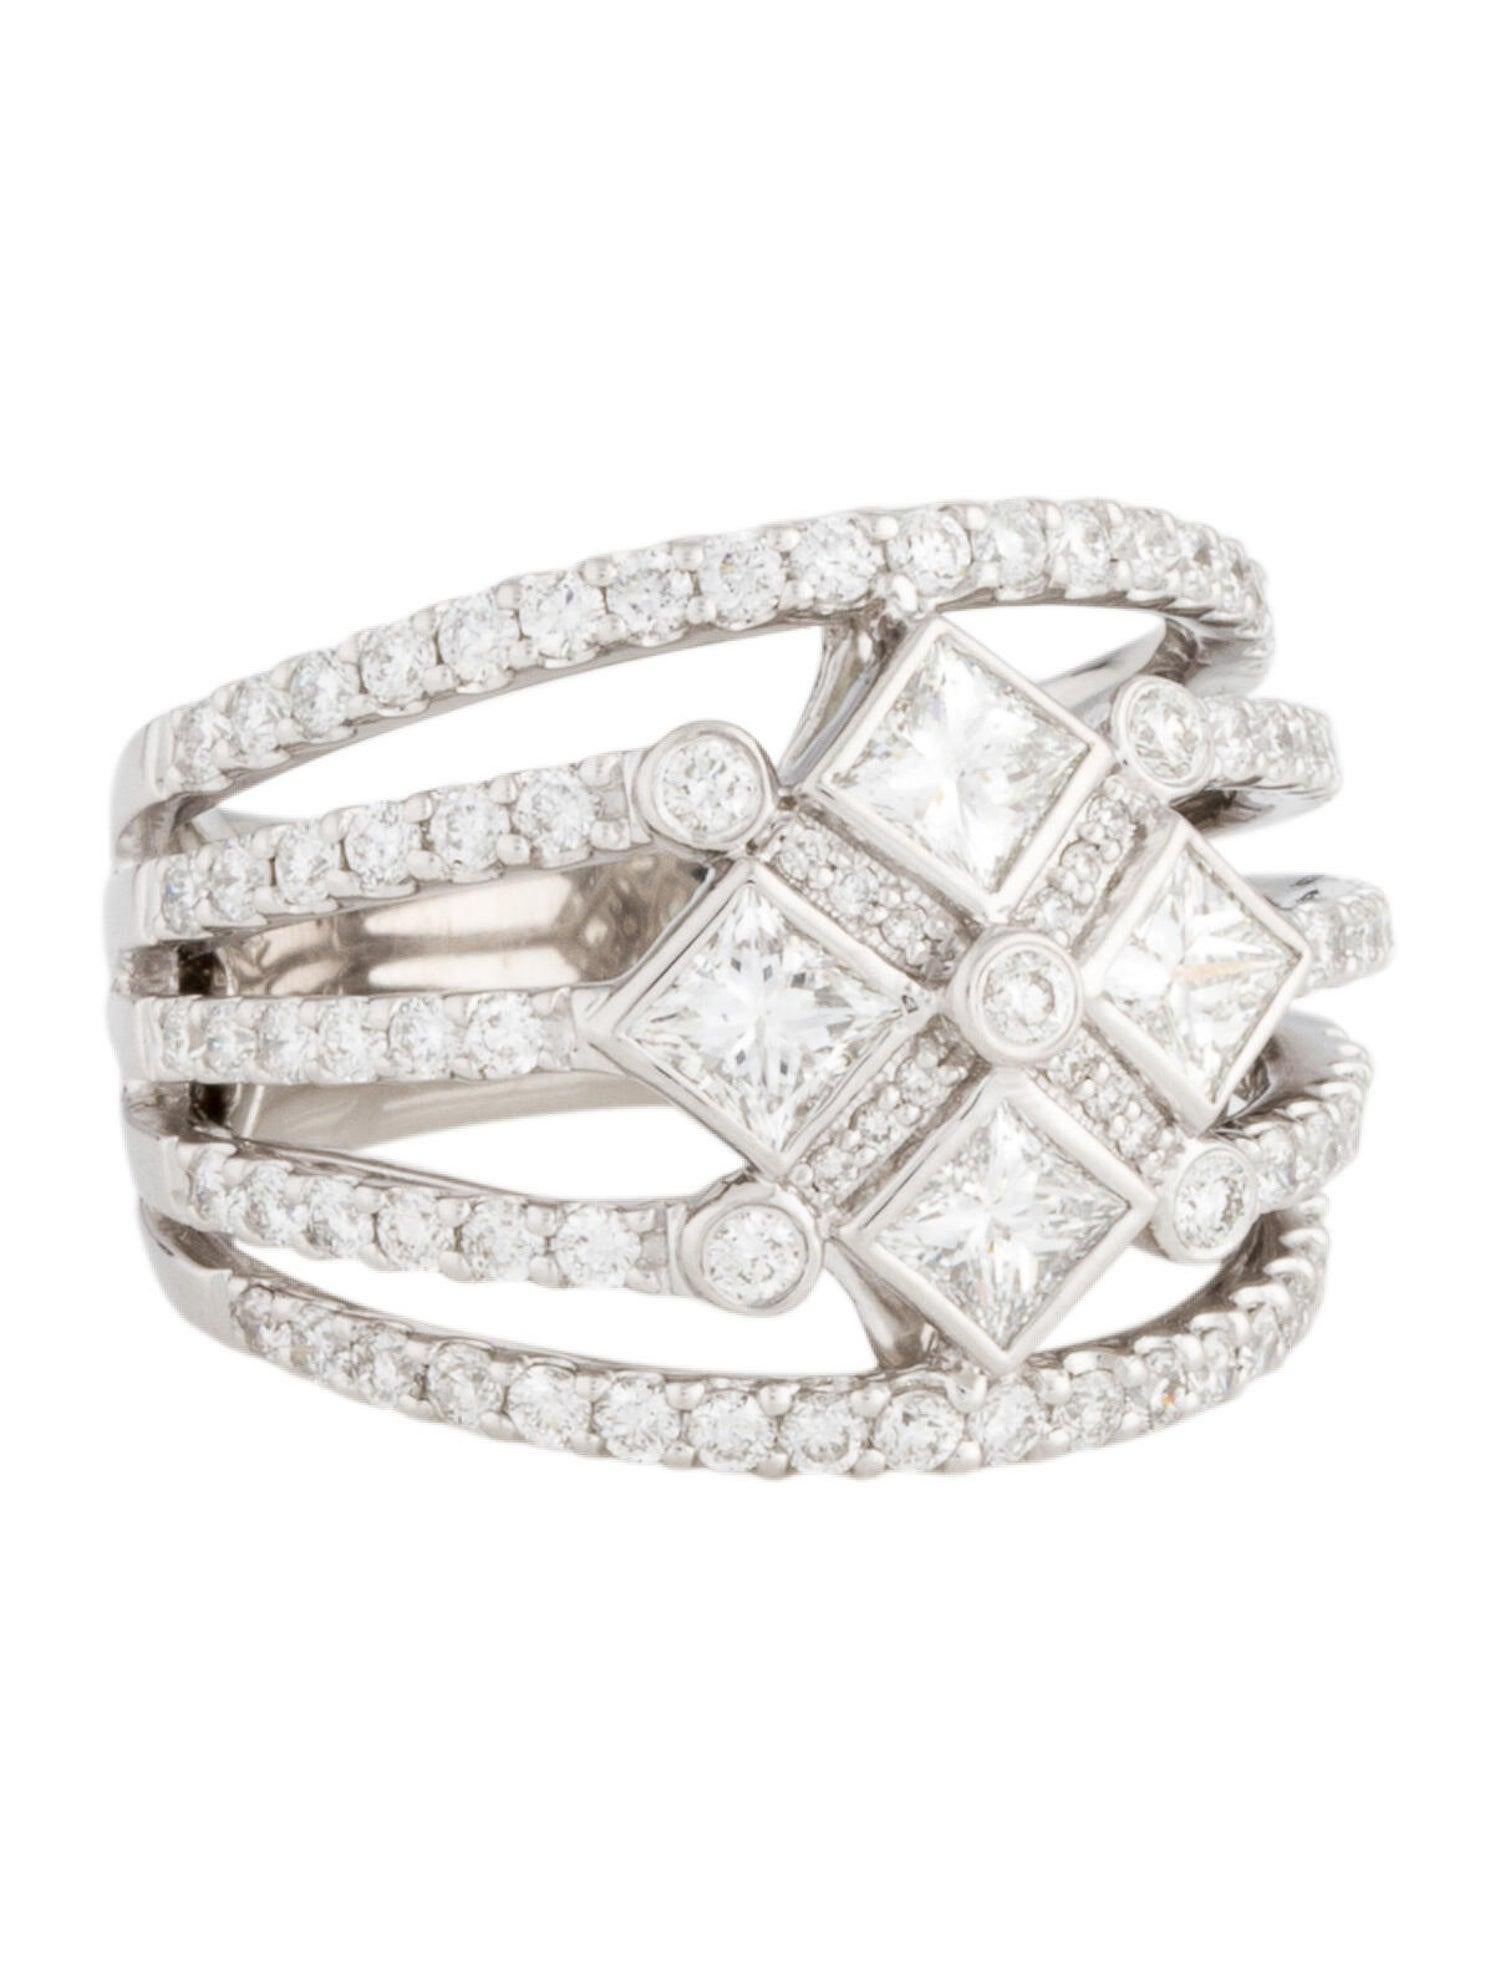 A beautiful 14Kt white gold diamond band featuring 1.06 carats of round brilliant diamonds and 1.04 carats of square modified brilliant diamonds. There are 4 princess cut diamonds and 89 round brilliant cut diamonds set in this band. The round